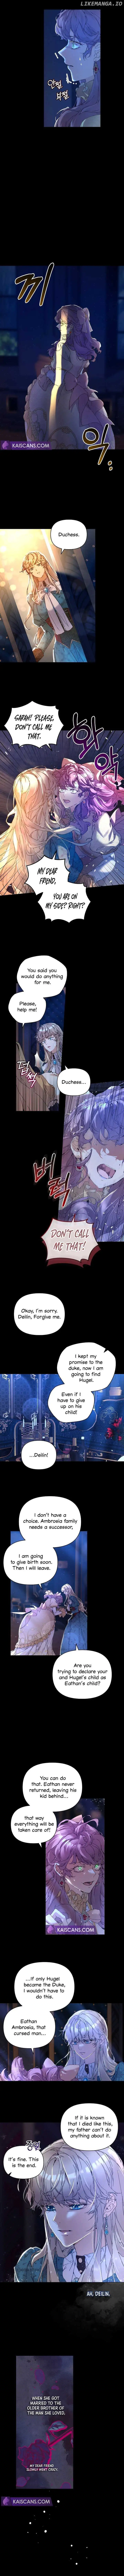 The Archvillain’s Dying Nanny Chapter 2 - page 6